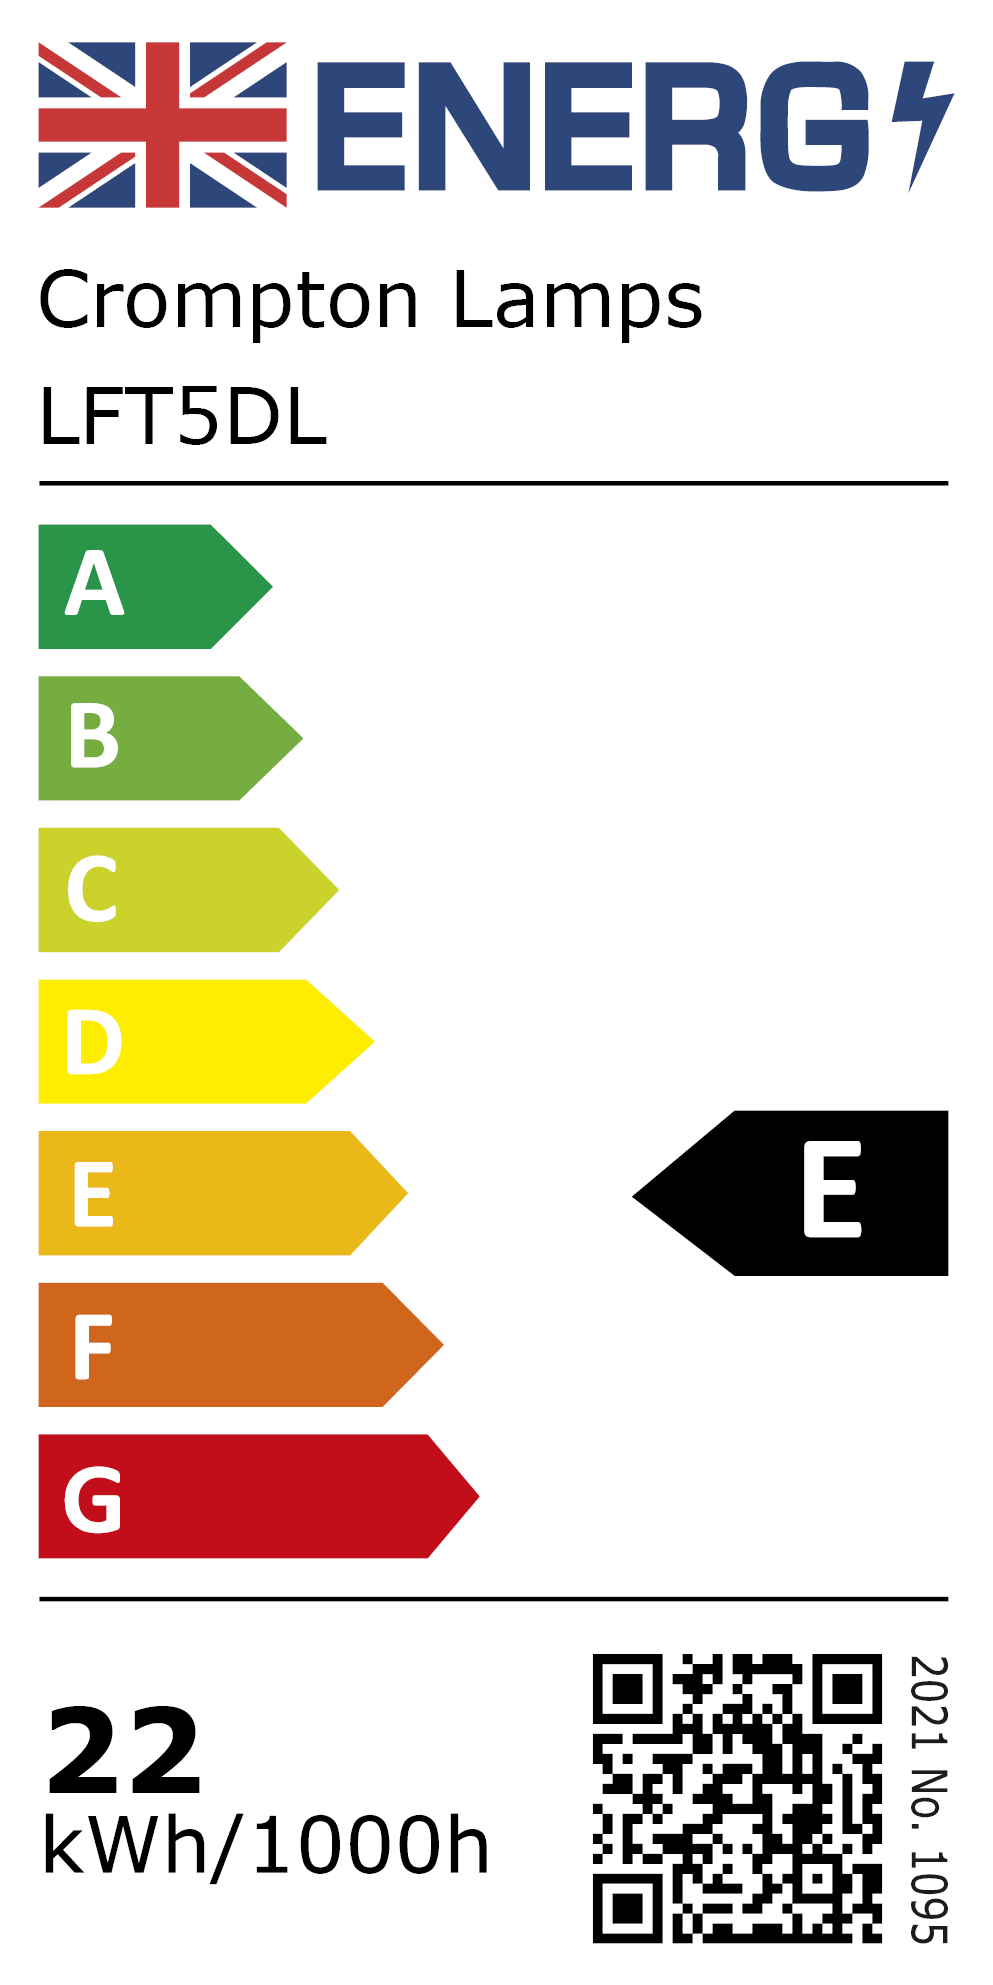 New 2021 Energy Rating Label: Stock Code LFT5DL